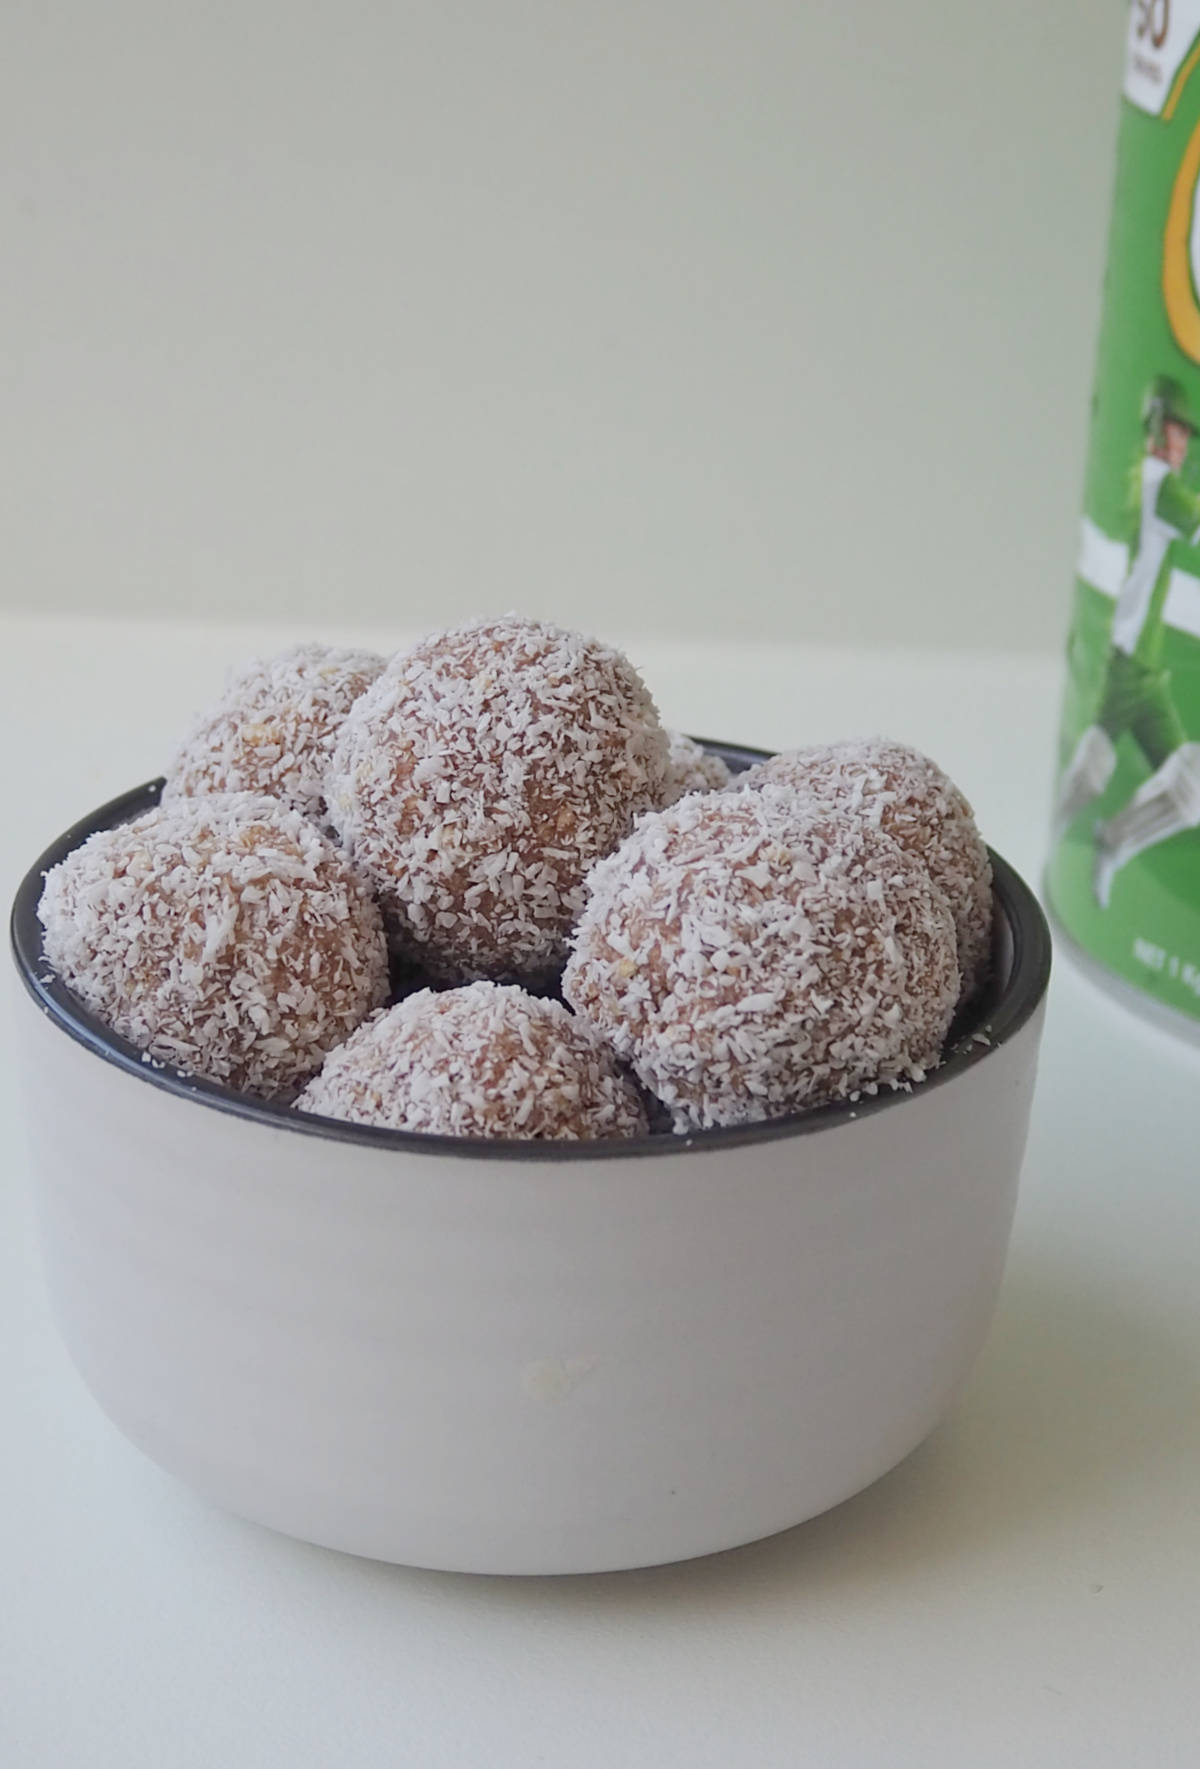 Milo Balls in a white bowl. in the background there is a tin of Milo.